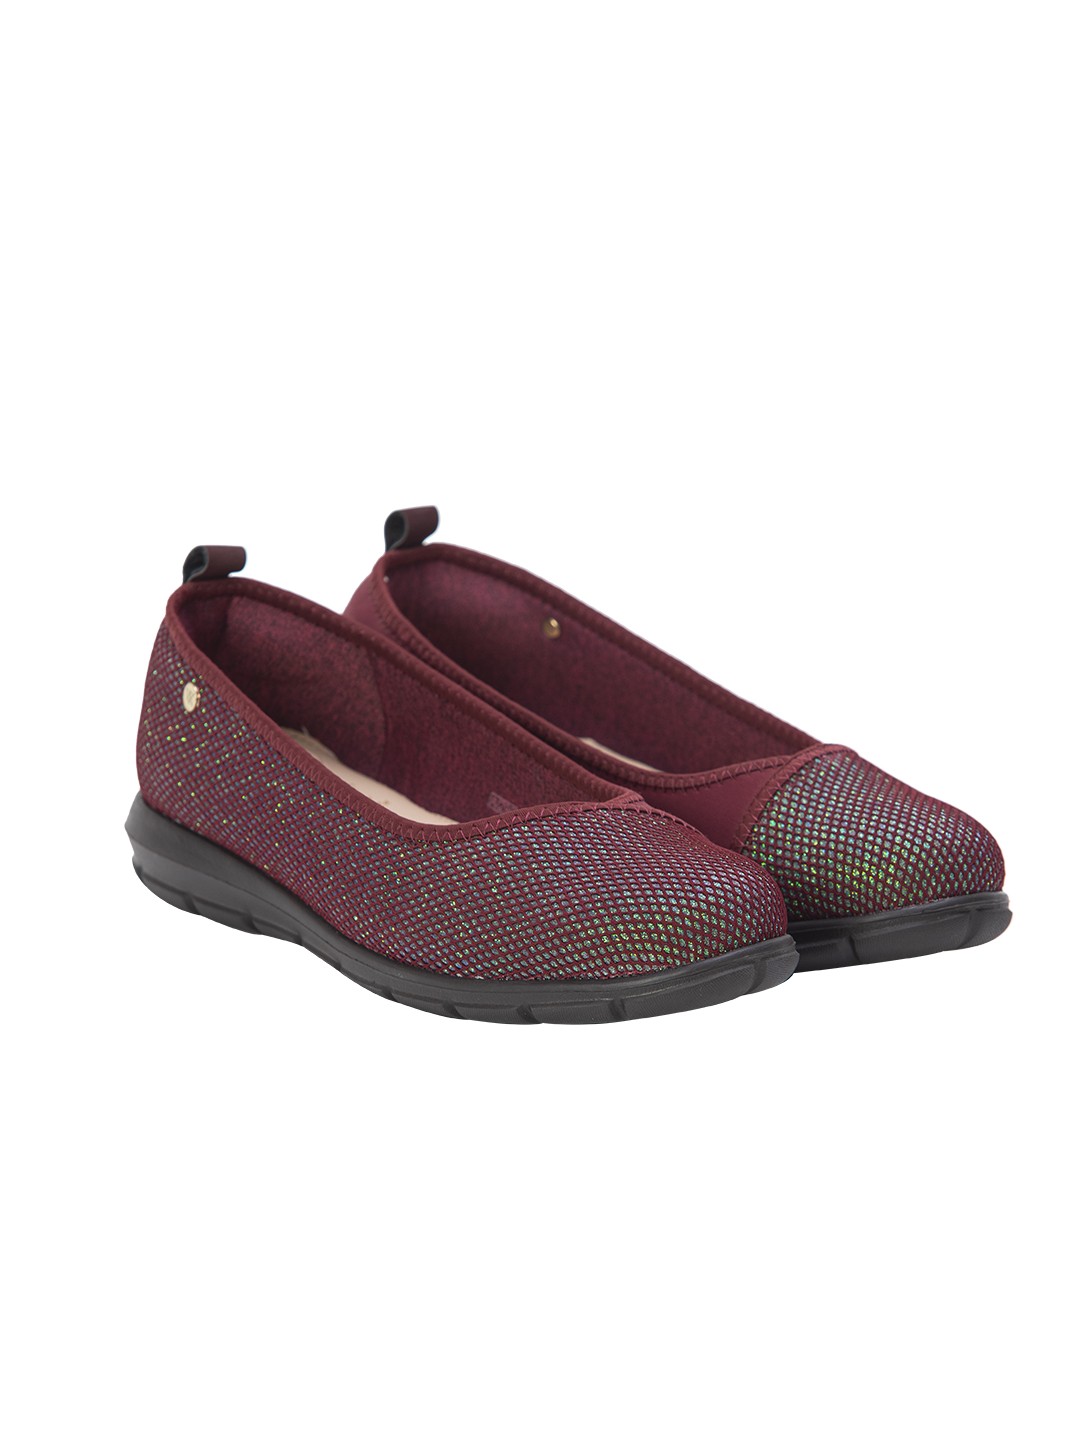 Buy Von Wellx Germany Comfort Pace Mehroon Casual Shoes Online in Kanpur